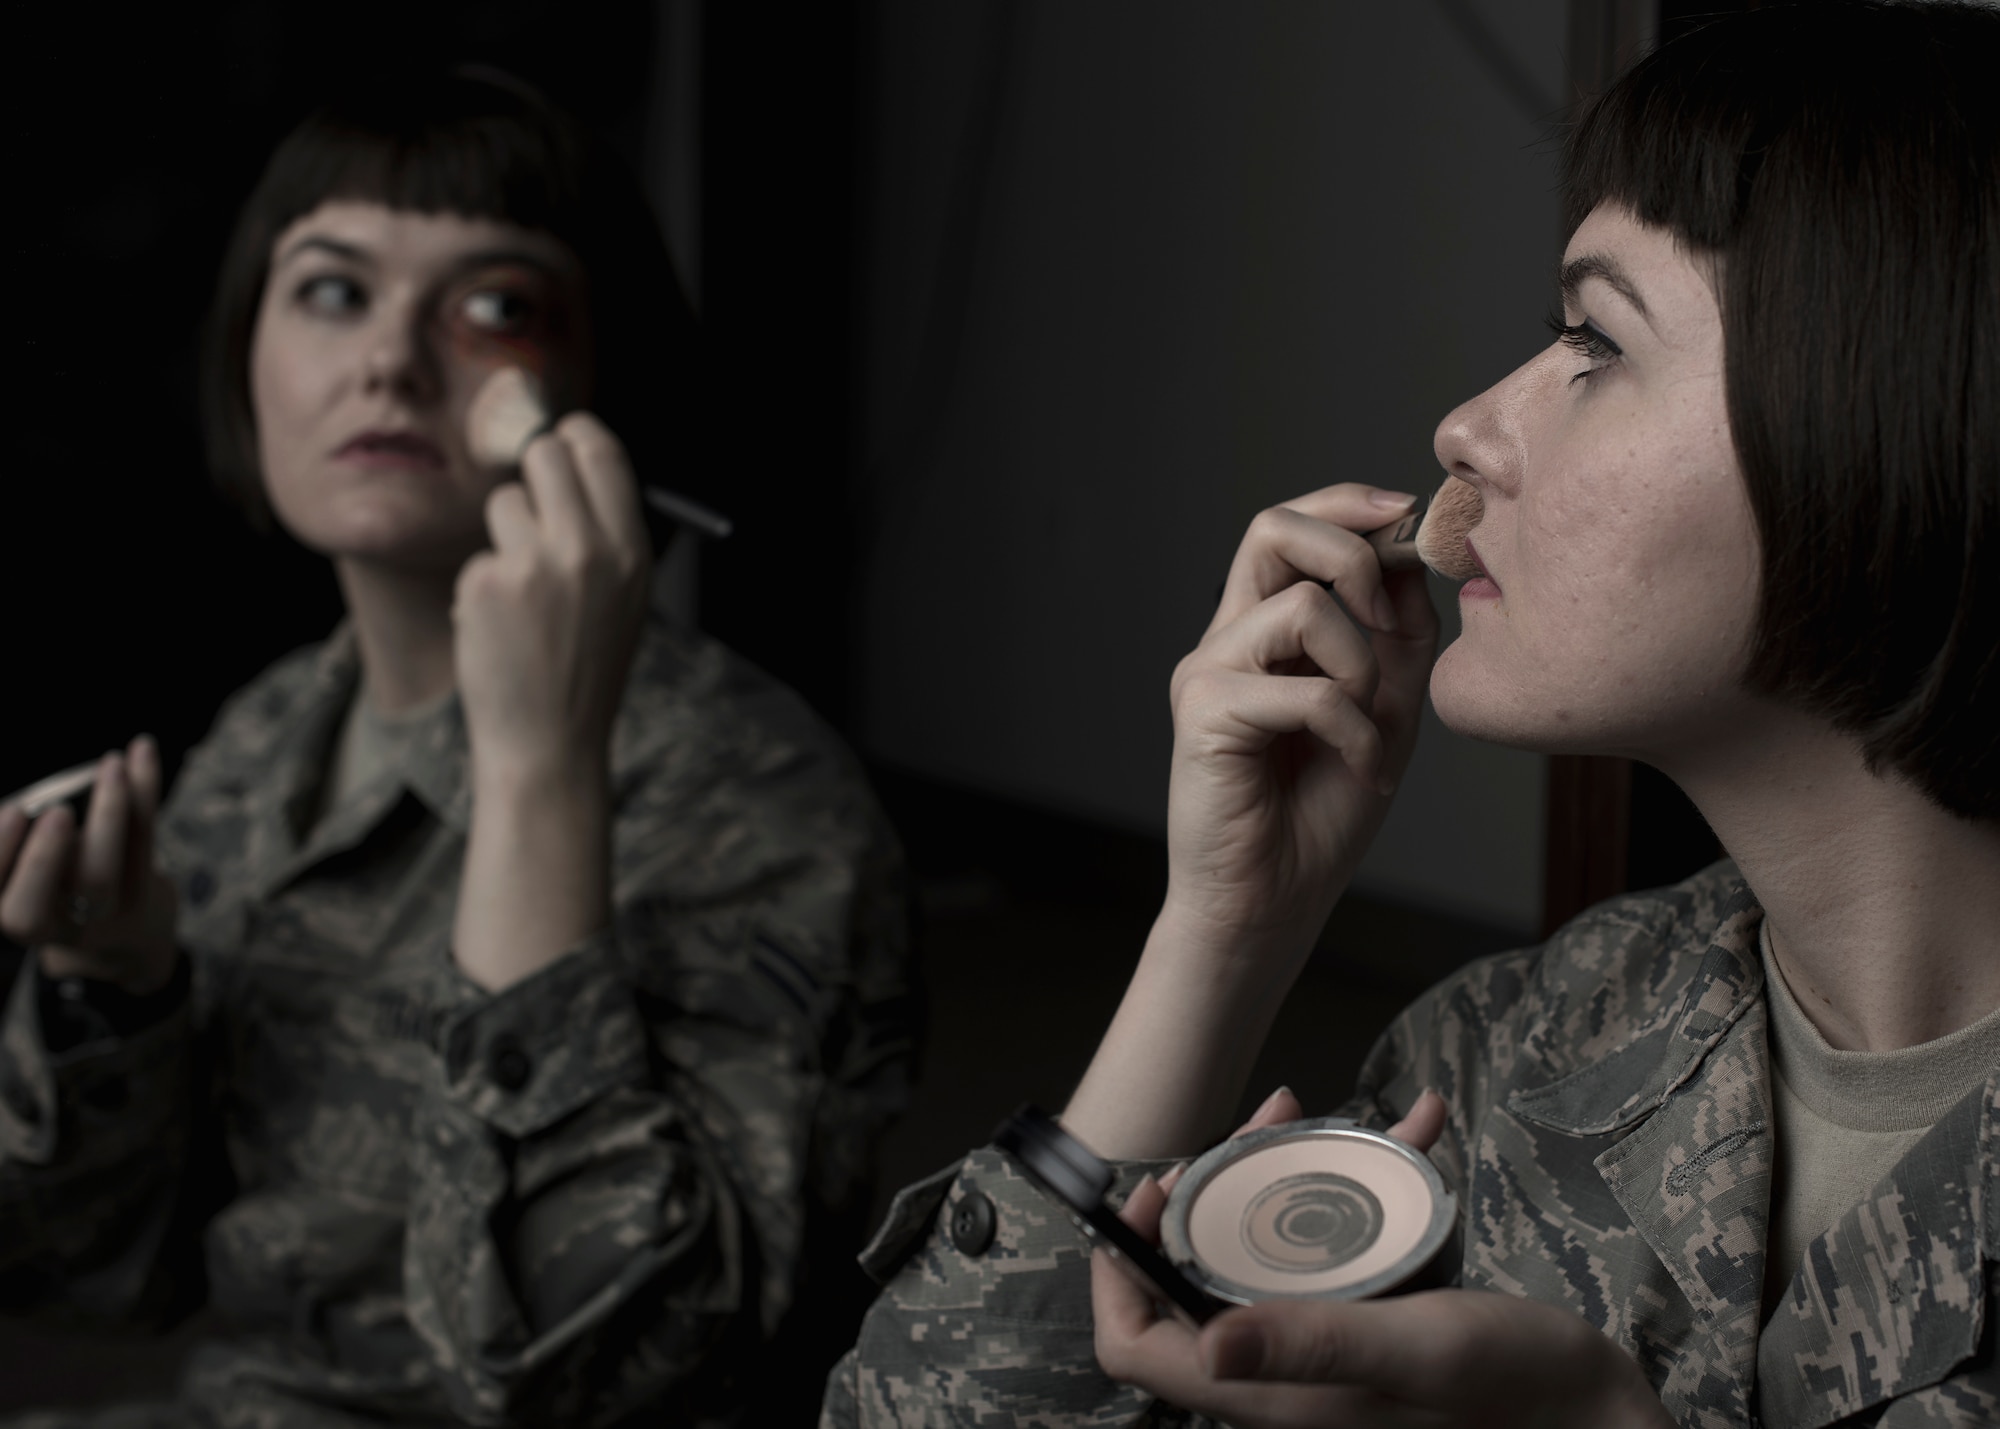 The month of October is Domestic Violence Awareness Month. Domestic violence does not discriminate; anyone can be a victim. For more information, visit the National Domestic Violence Hotline website at www.thehotline.org. (U.S. Air Force photo illustration by Staff Sgt. BreeAnn Sachs)